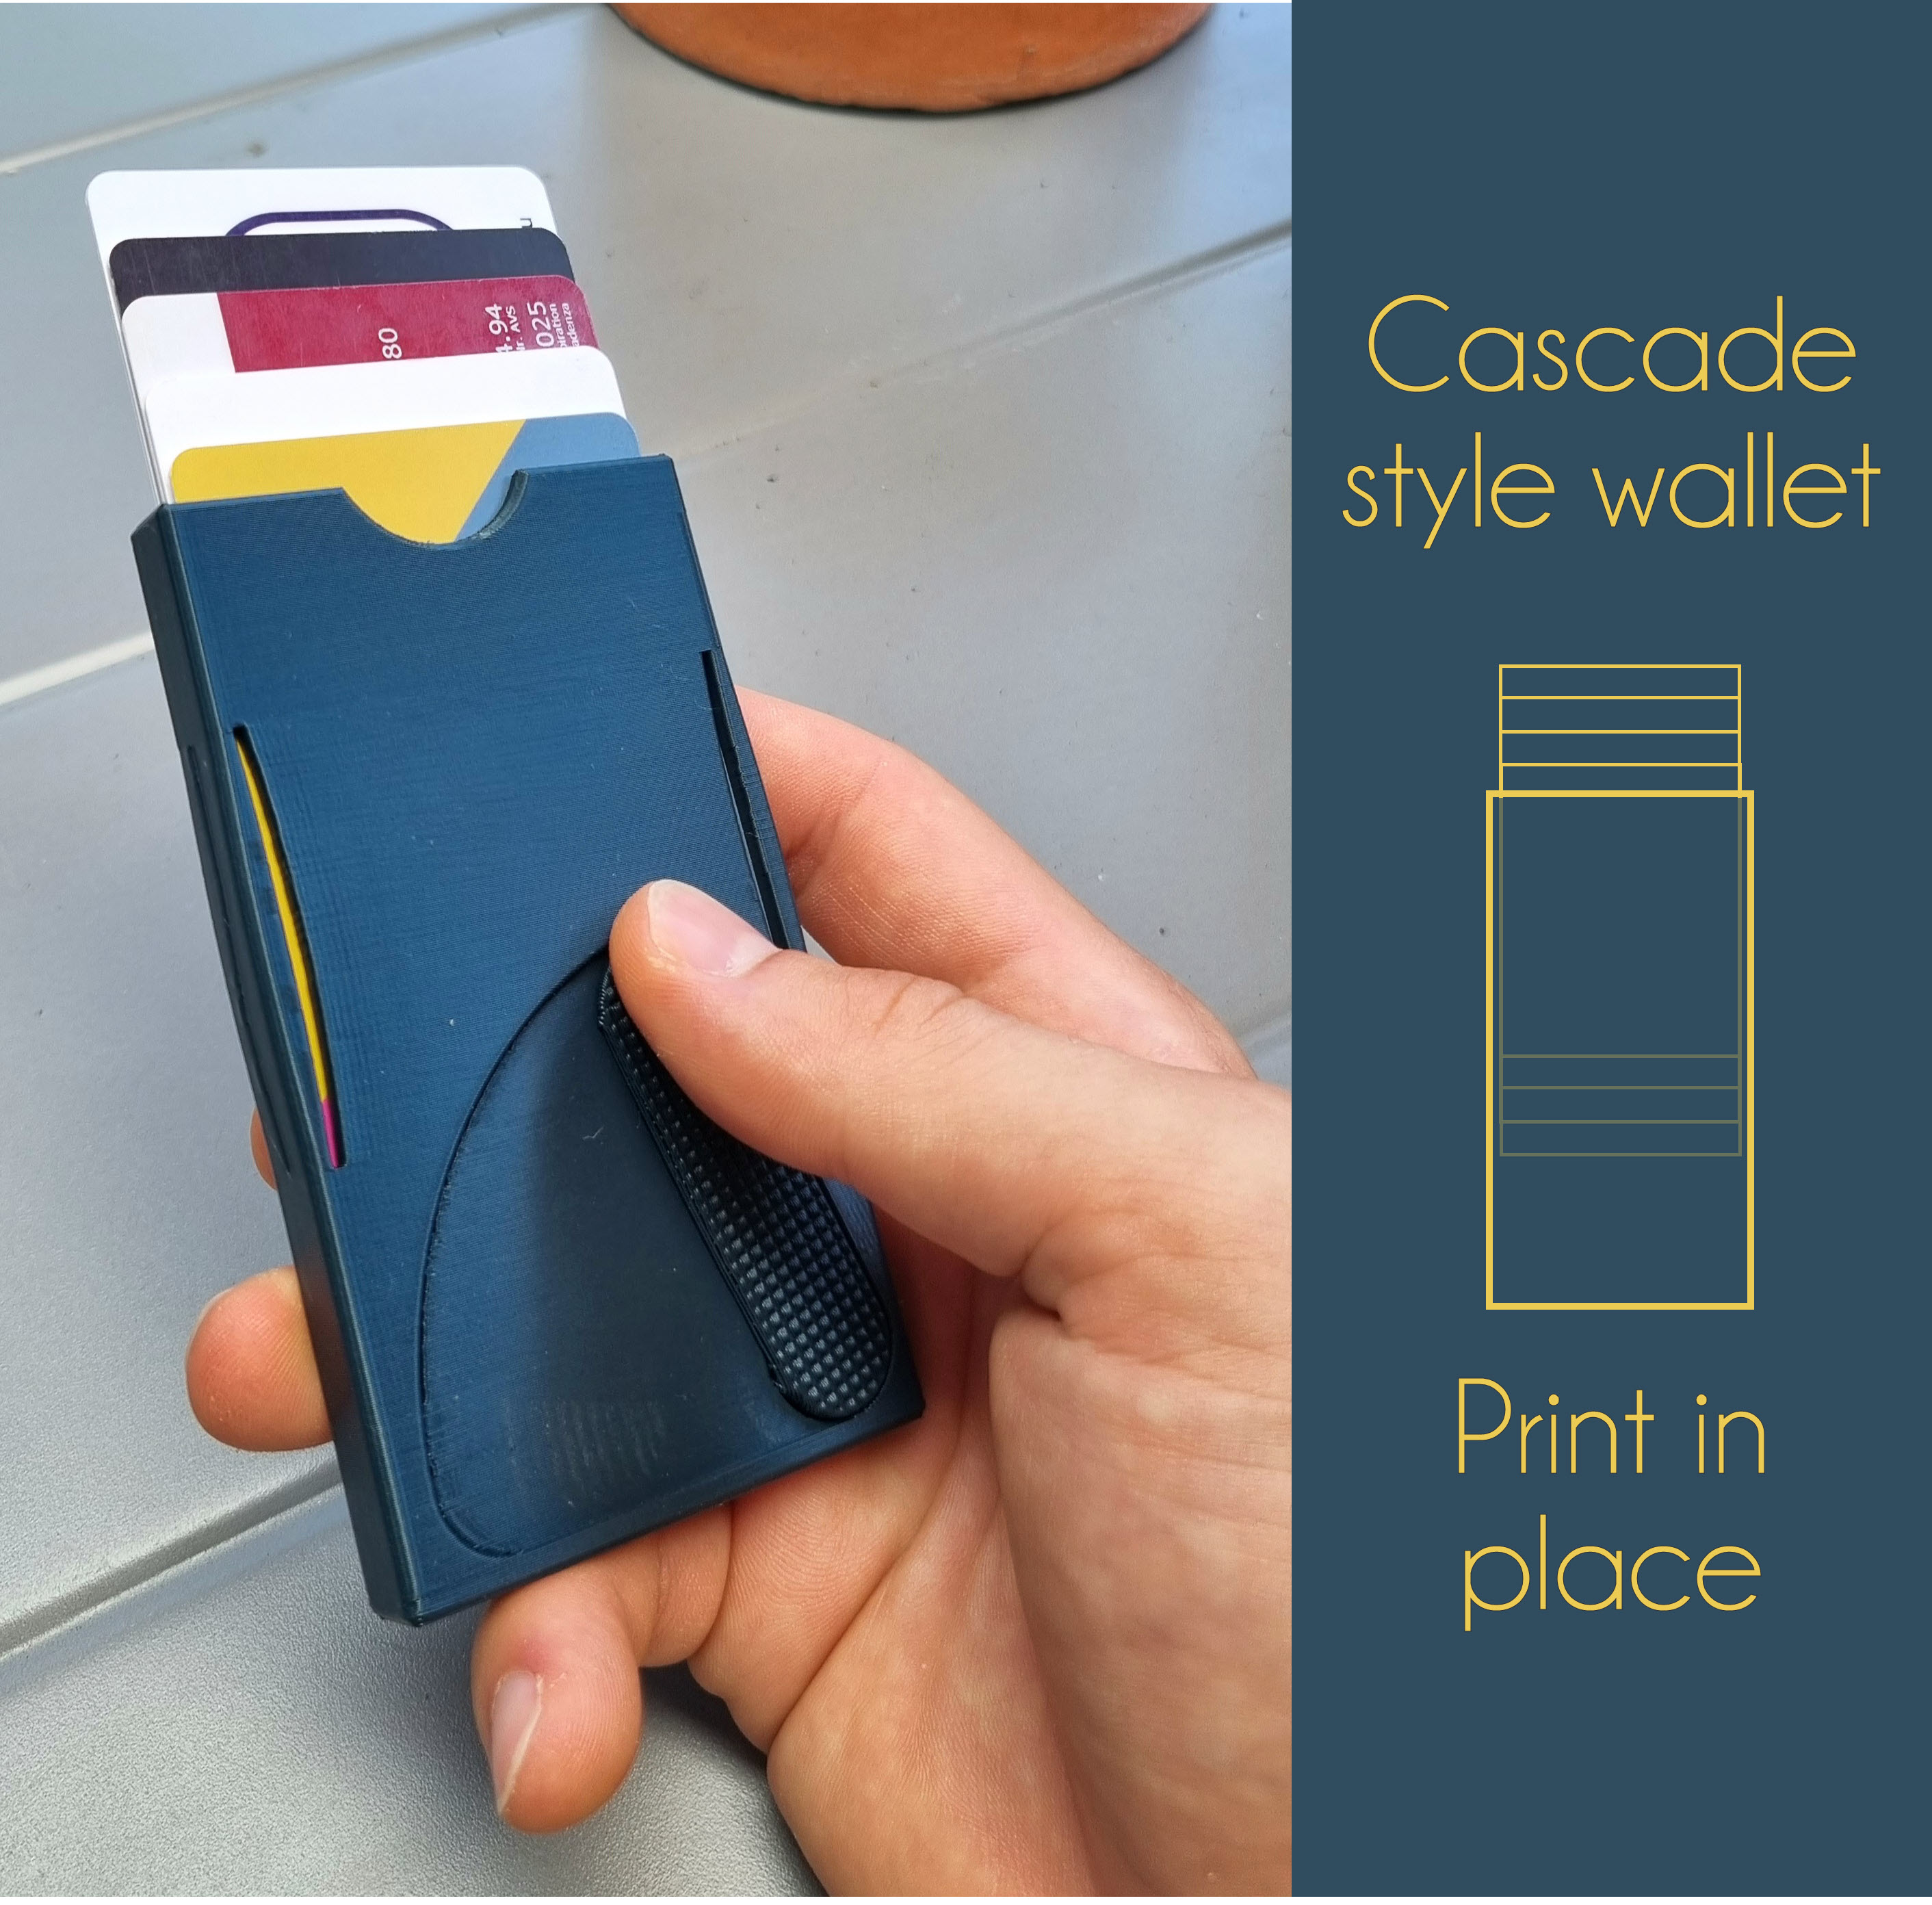 Cascade card wallet (Print-in-place)